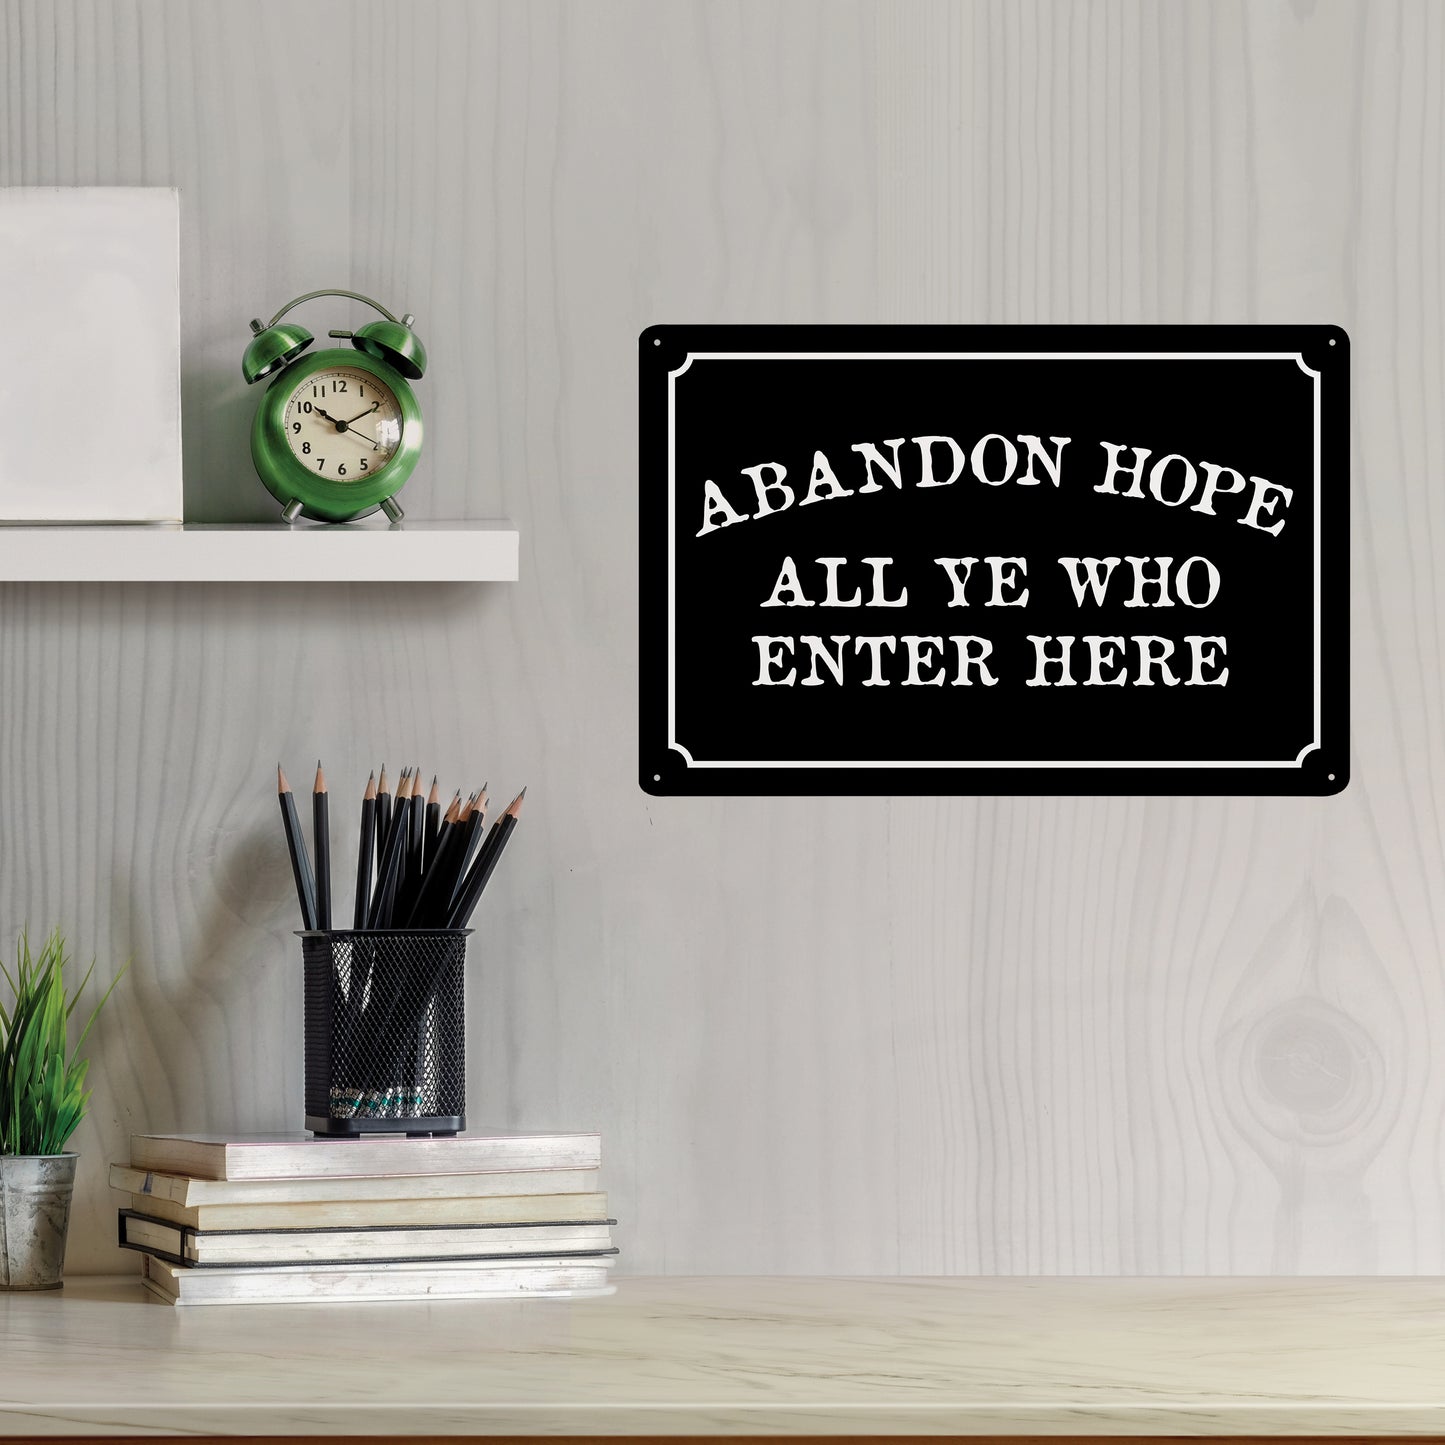 Abandon Hope All Ye Who Enter Here - 8" x 12" Funny Plastic (PVC) Sign (With Pre-Drilled Holes for Easy Mounting)